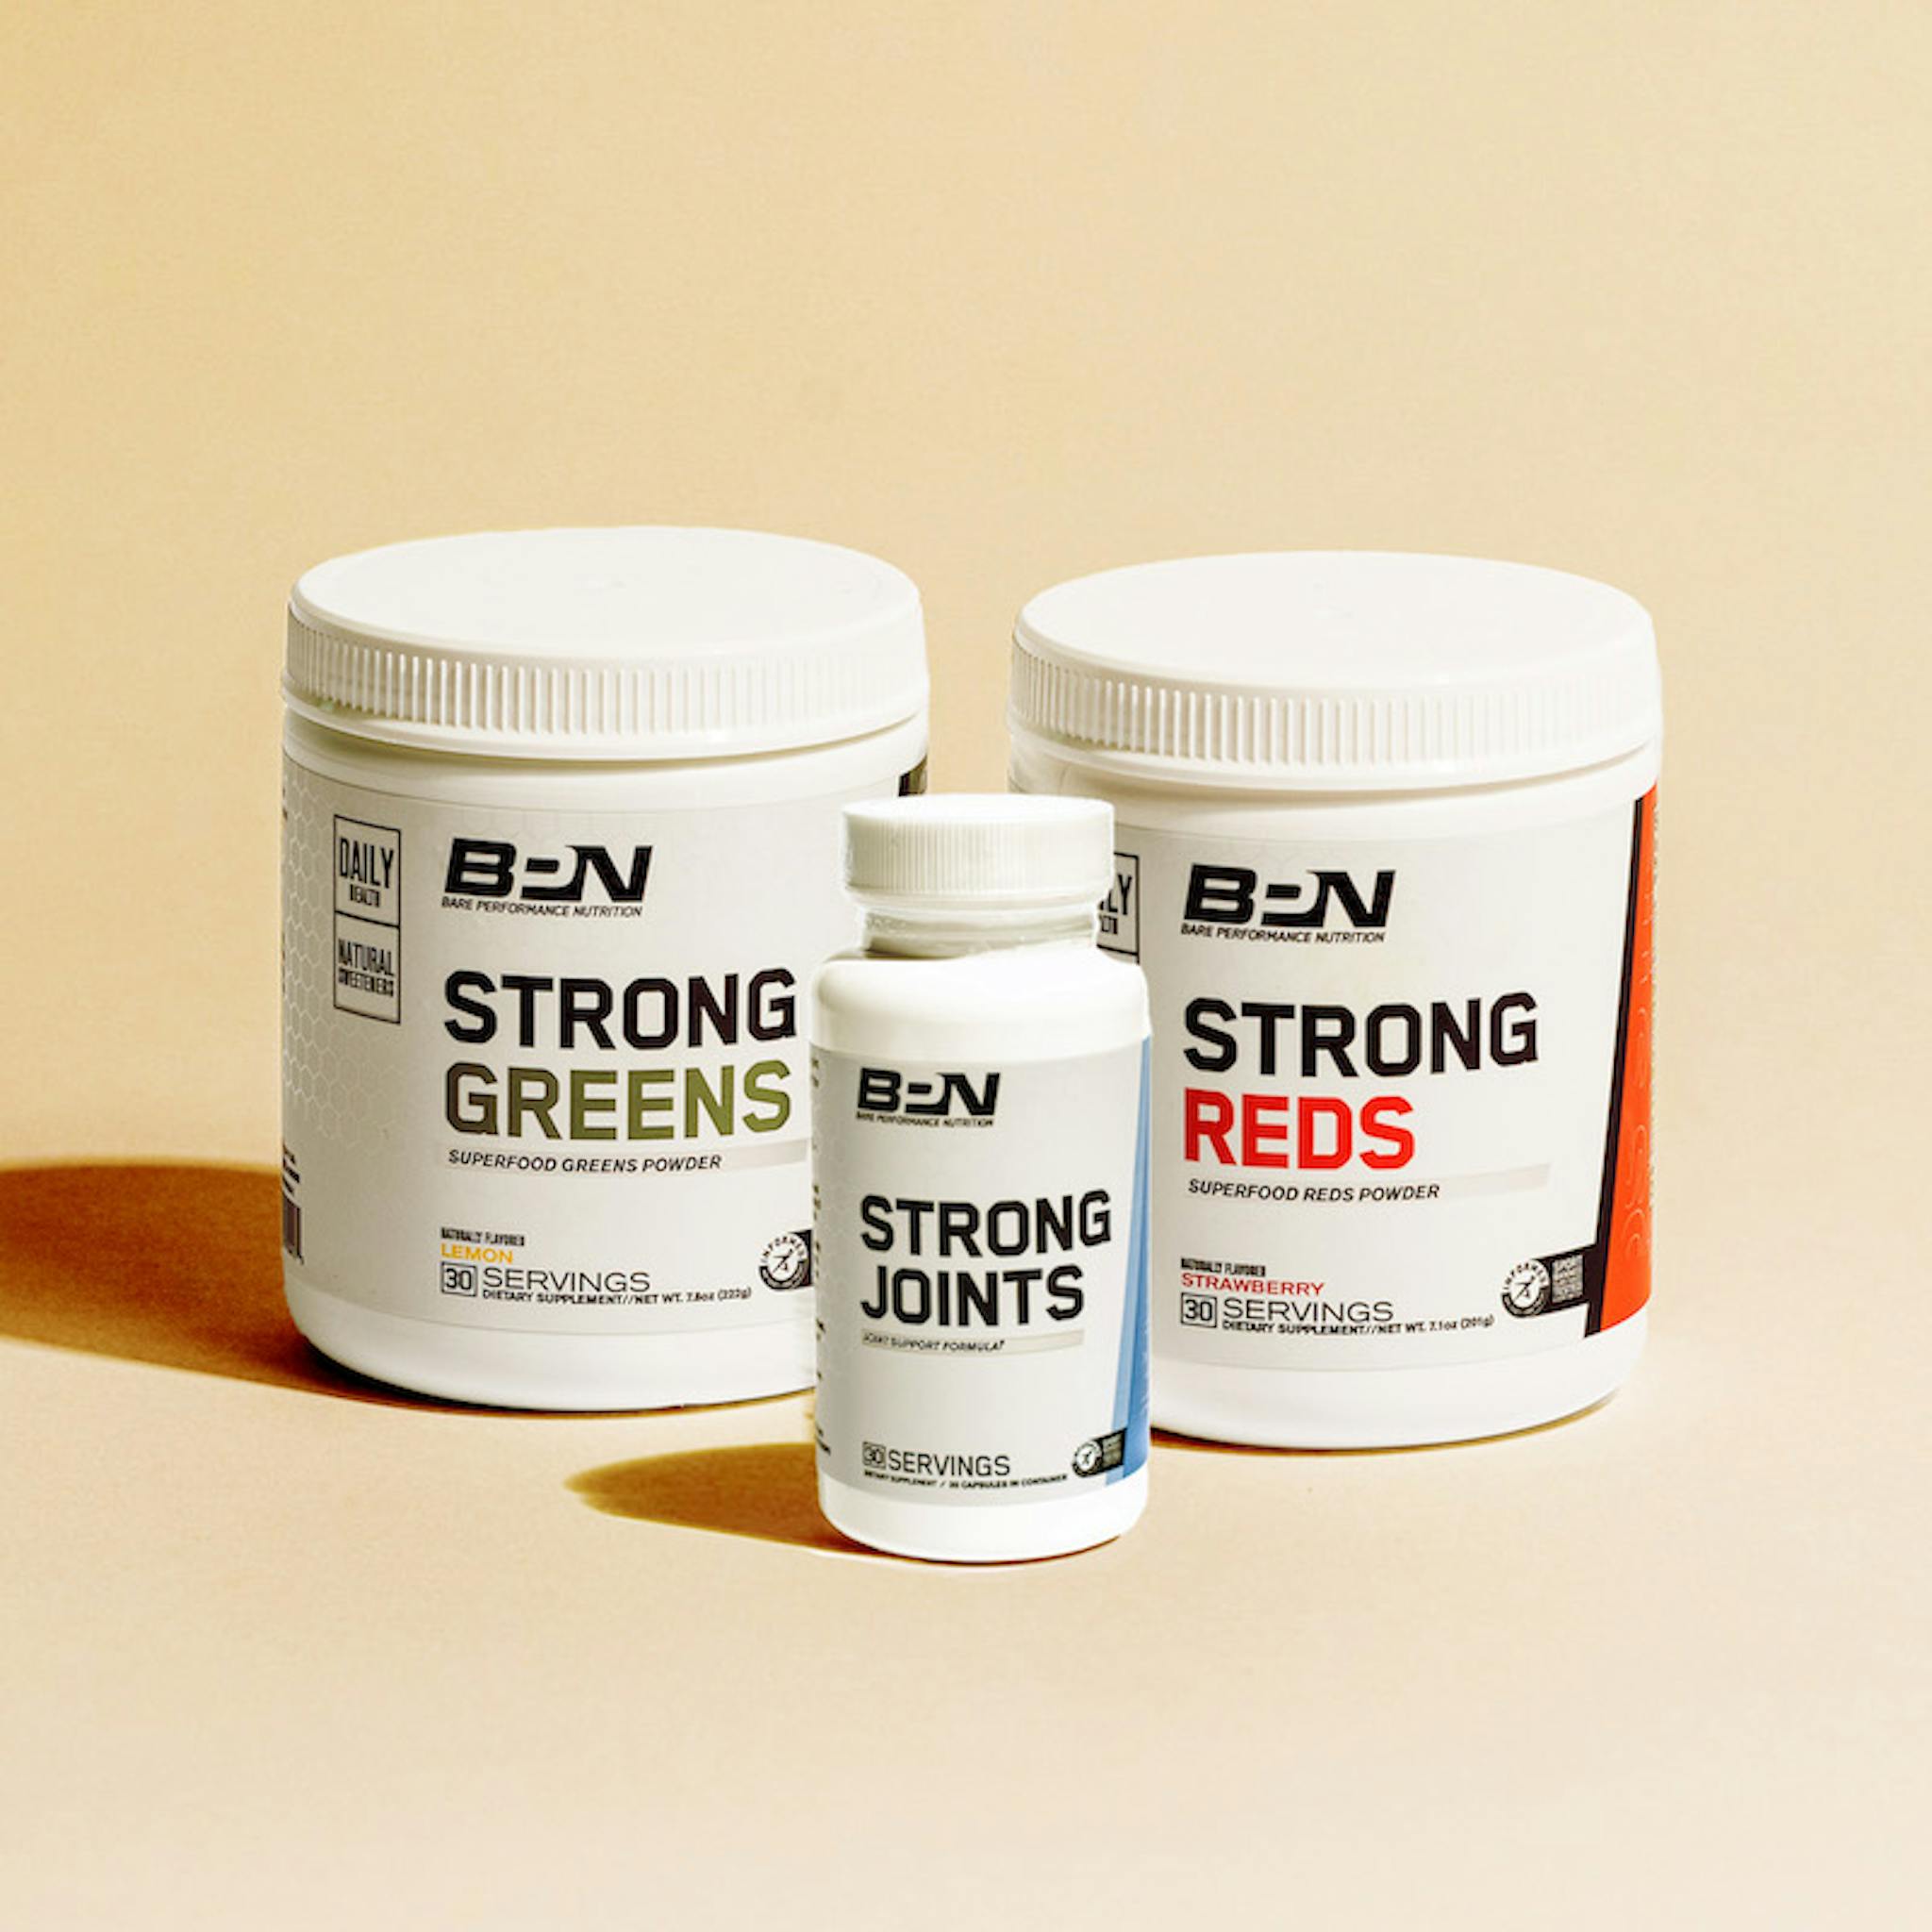 BPN Strong Greens, Strong Reds, & Strong Joints